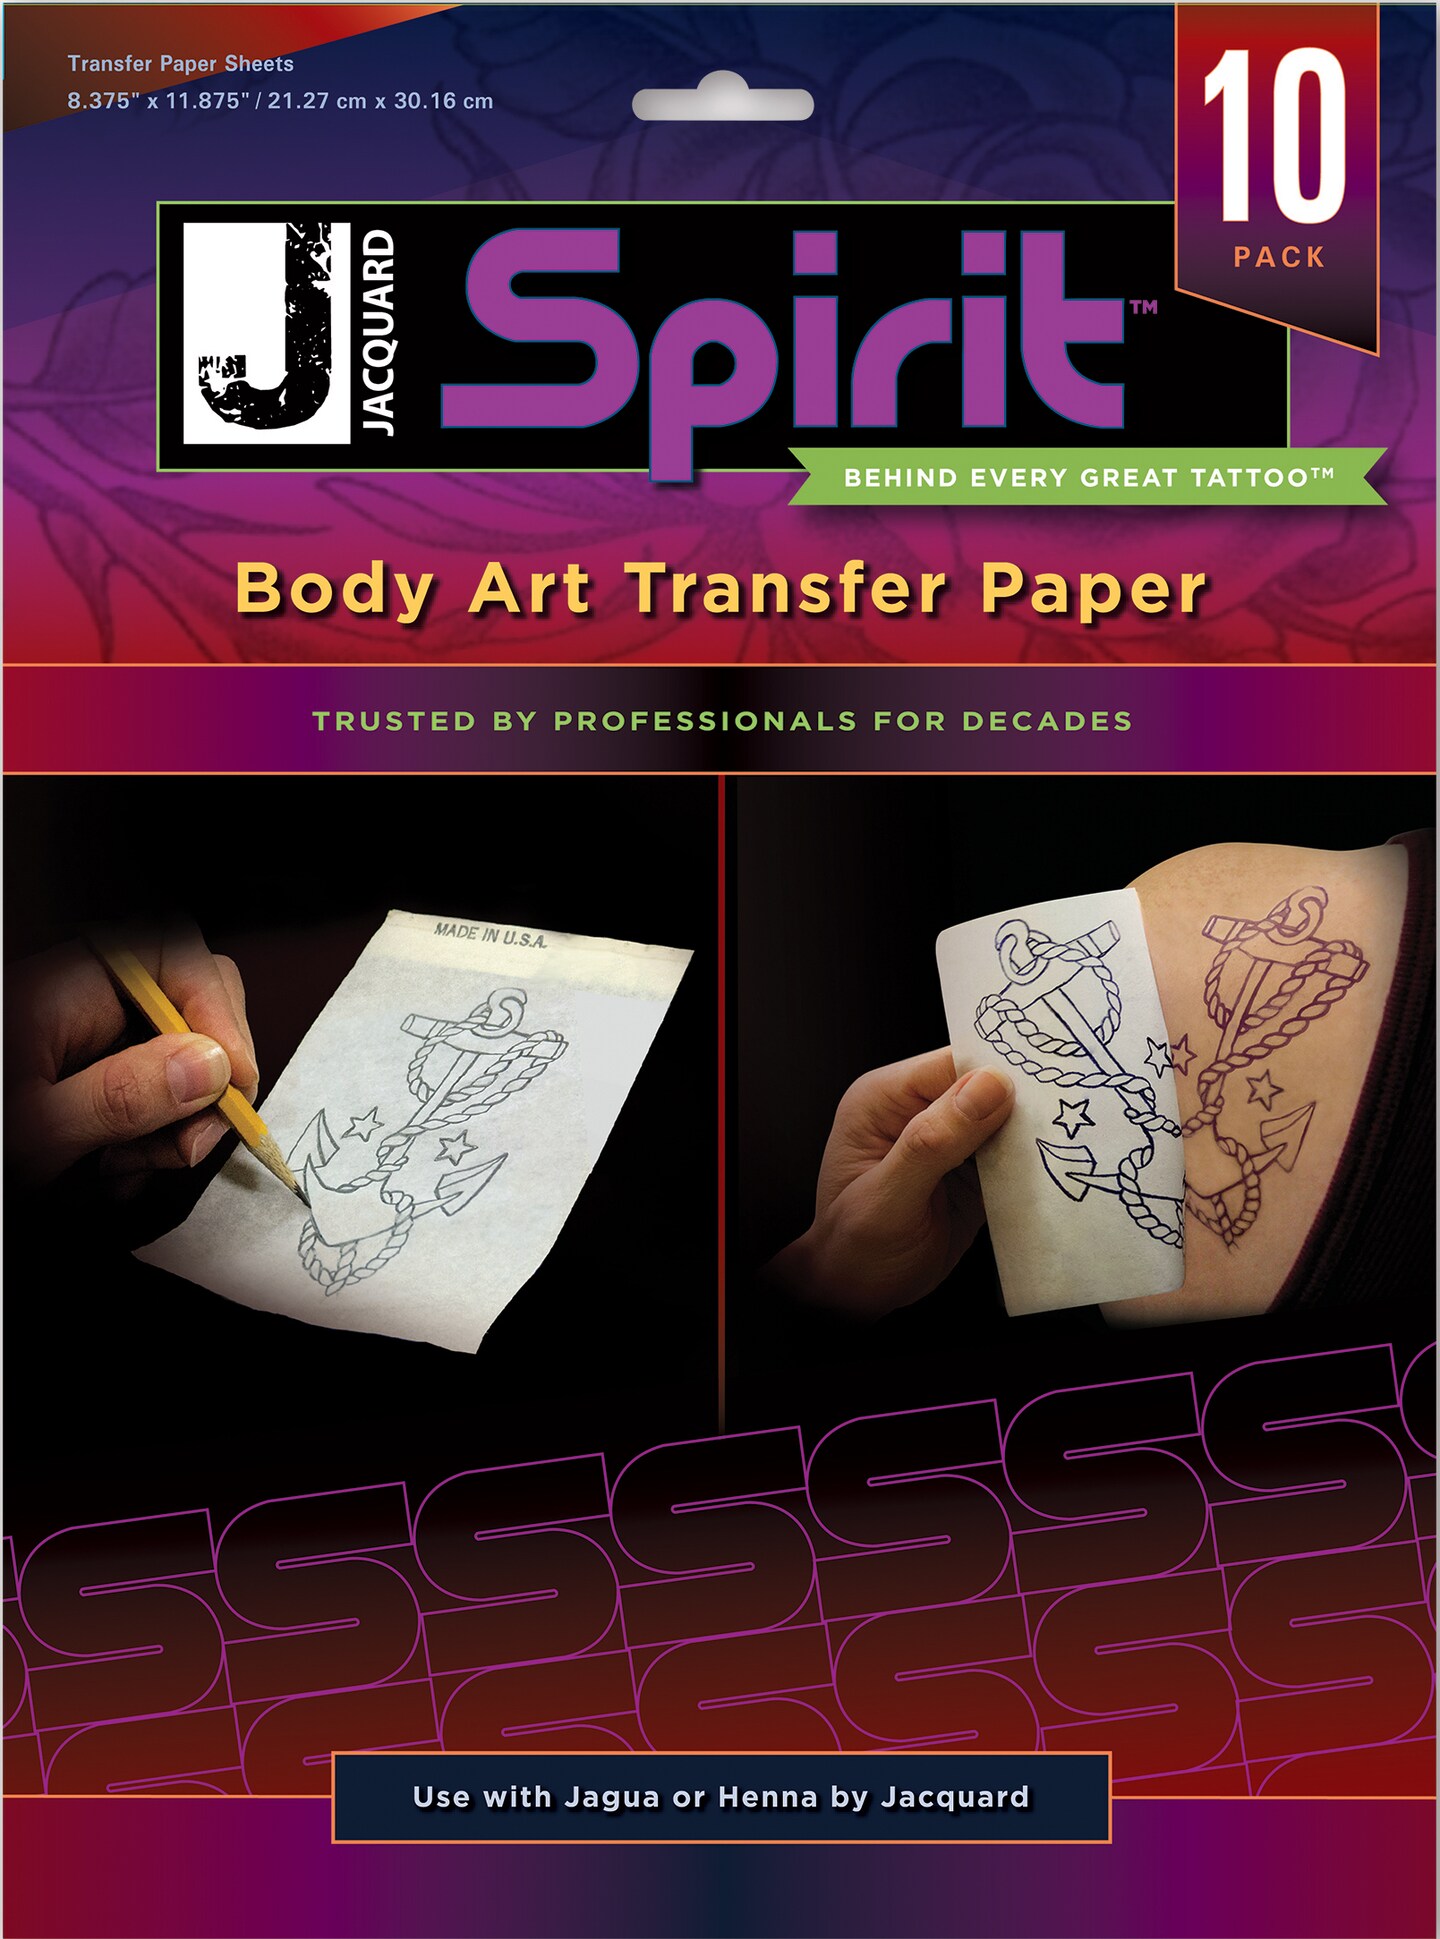  SPIRIT BRAND THERMAL STENCIL TRANSFER PAPER x 100 SHEETS :  Arts, Crafts & Sewing